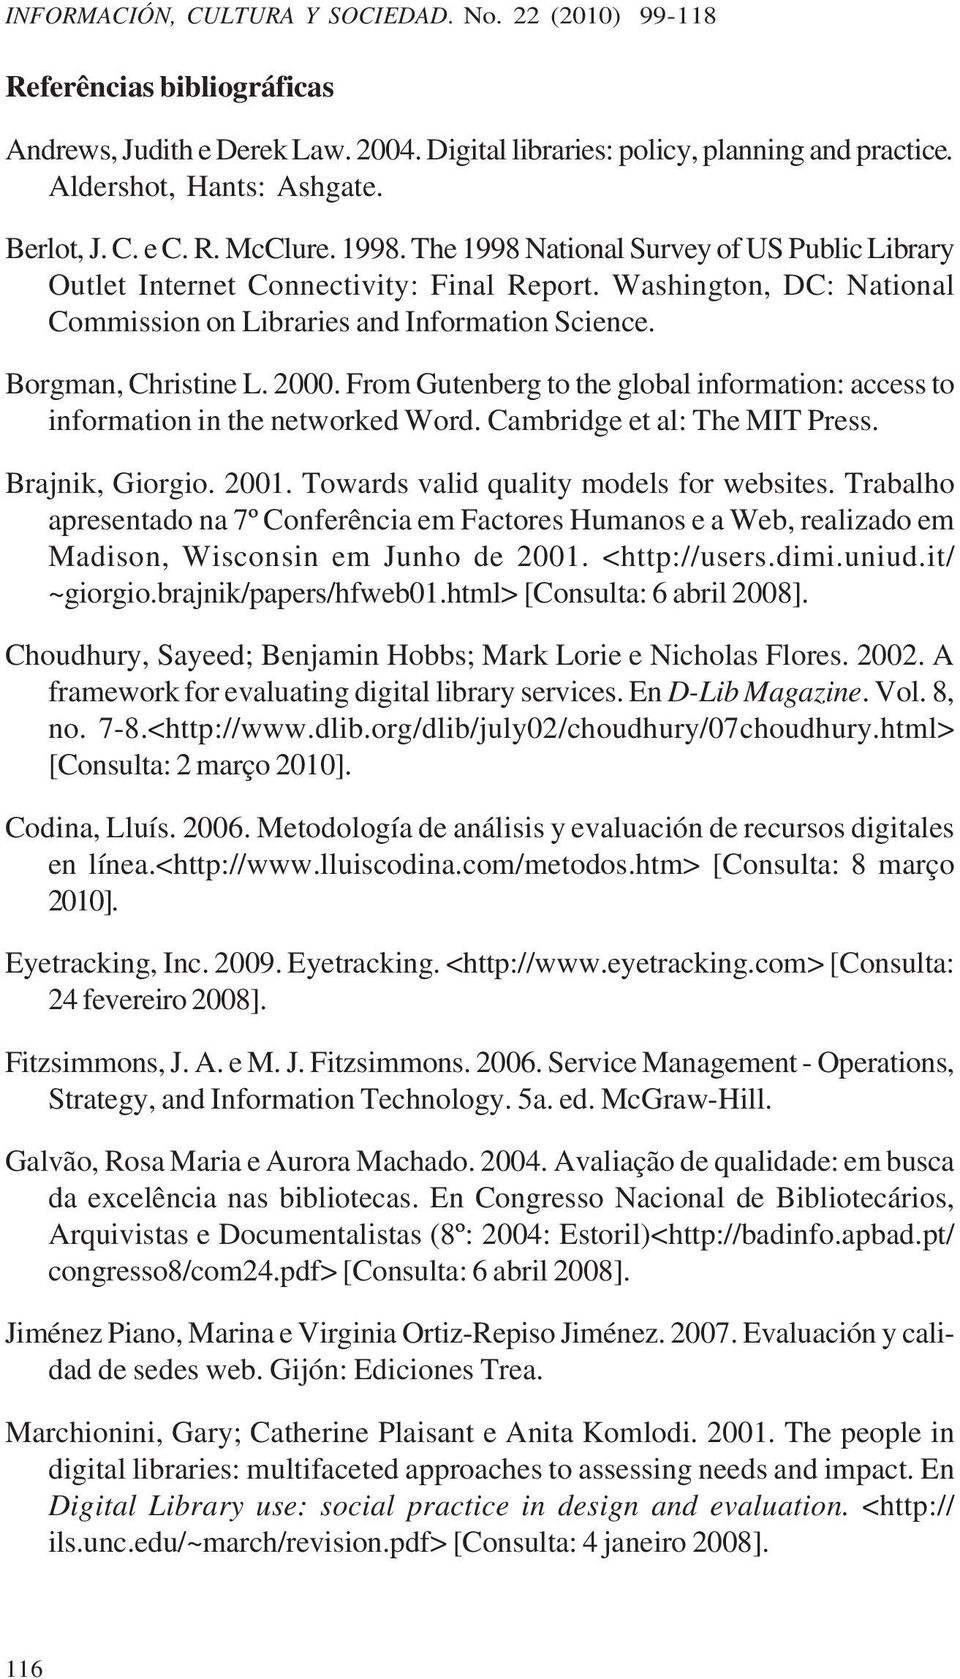 Borgman, Christine L. 2000. From Gutenberg to the global information: access to information in the networked Word. Cambridge et al: The MIT Press. Brajnik, Giorgio. 2001.